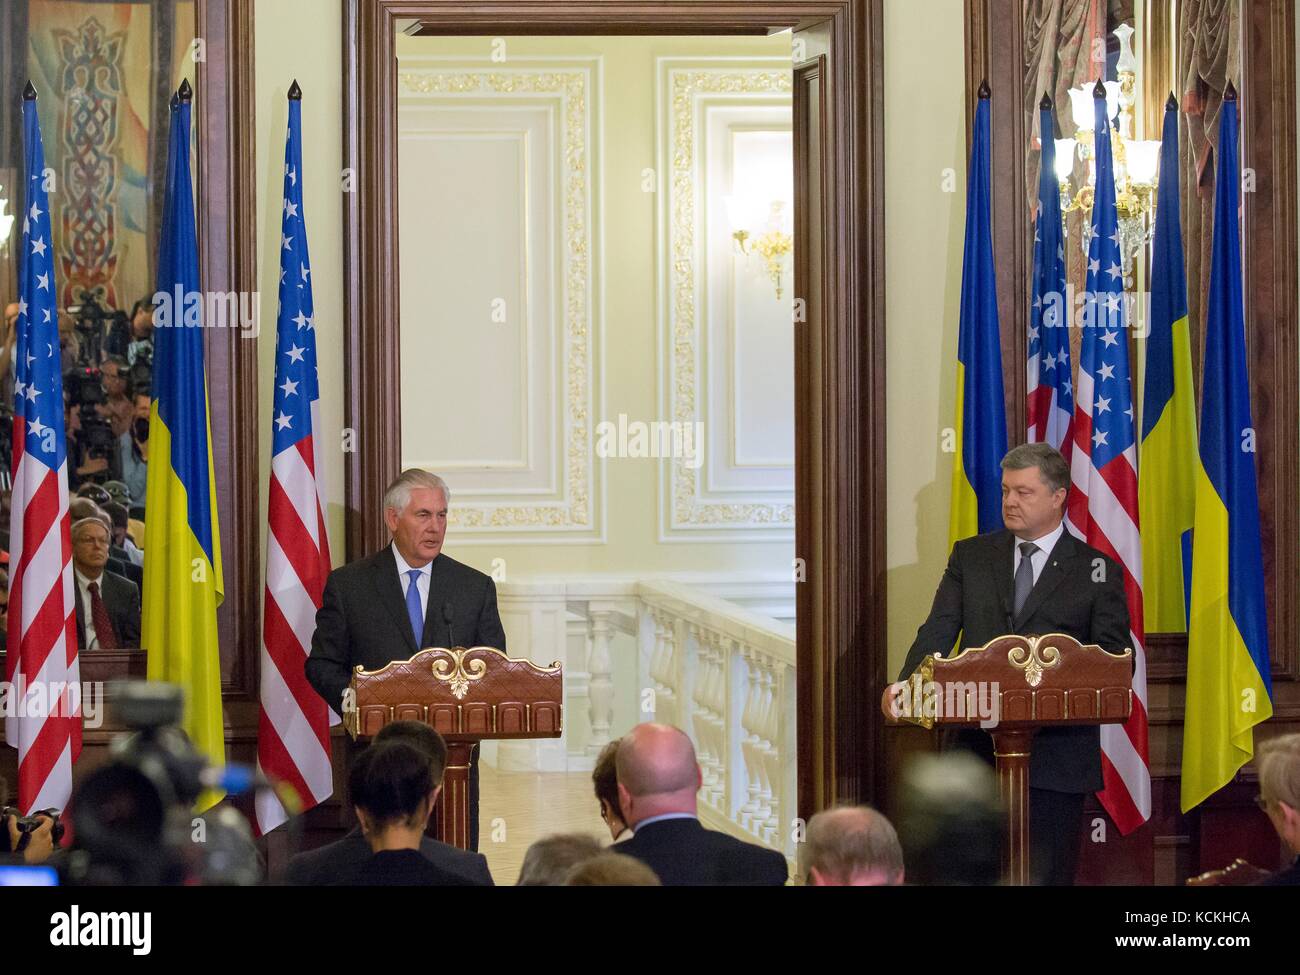 U.S. Secretary of State Rex Tillerson (left) and Ukrainian President Petro Poroshenko hold a joint press conference July 9, 2017 in Kyiv, Ukraine.     (photo by State Department Photo via Planetpix) Stock Photo